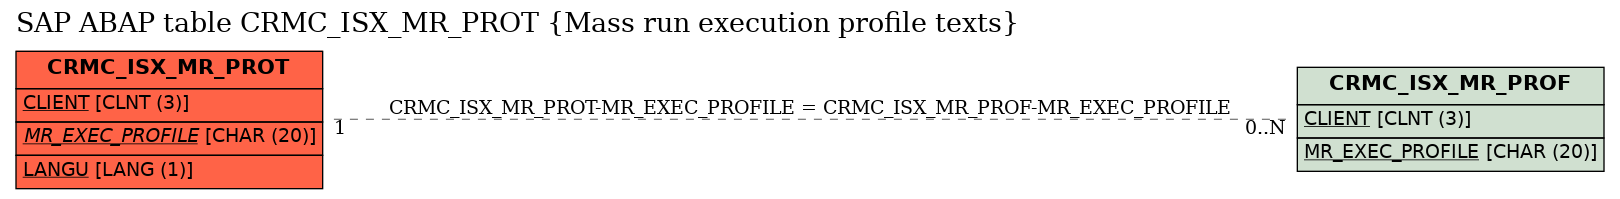 E-R Diagram for table CRMC_ISX_MR_PROT (Mass run execution profile texts)